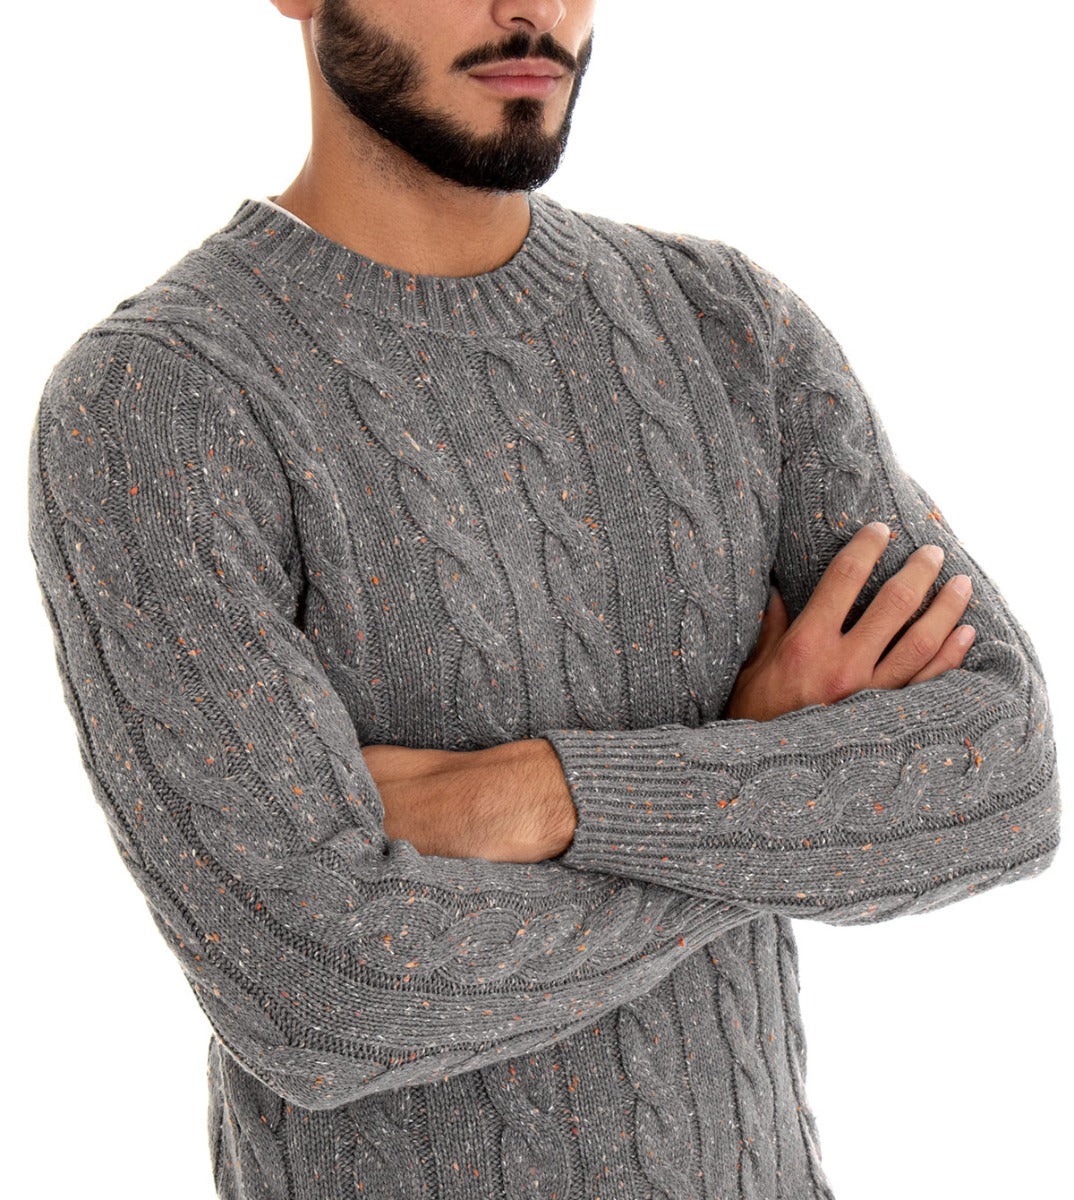 Men's Sweater with Mélange Braid Texture Crew-neck Sweater Light Gray Pullover GIOSAL